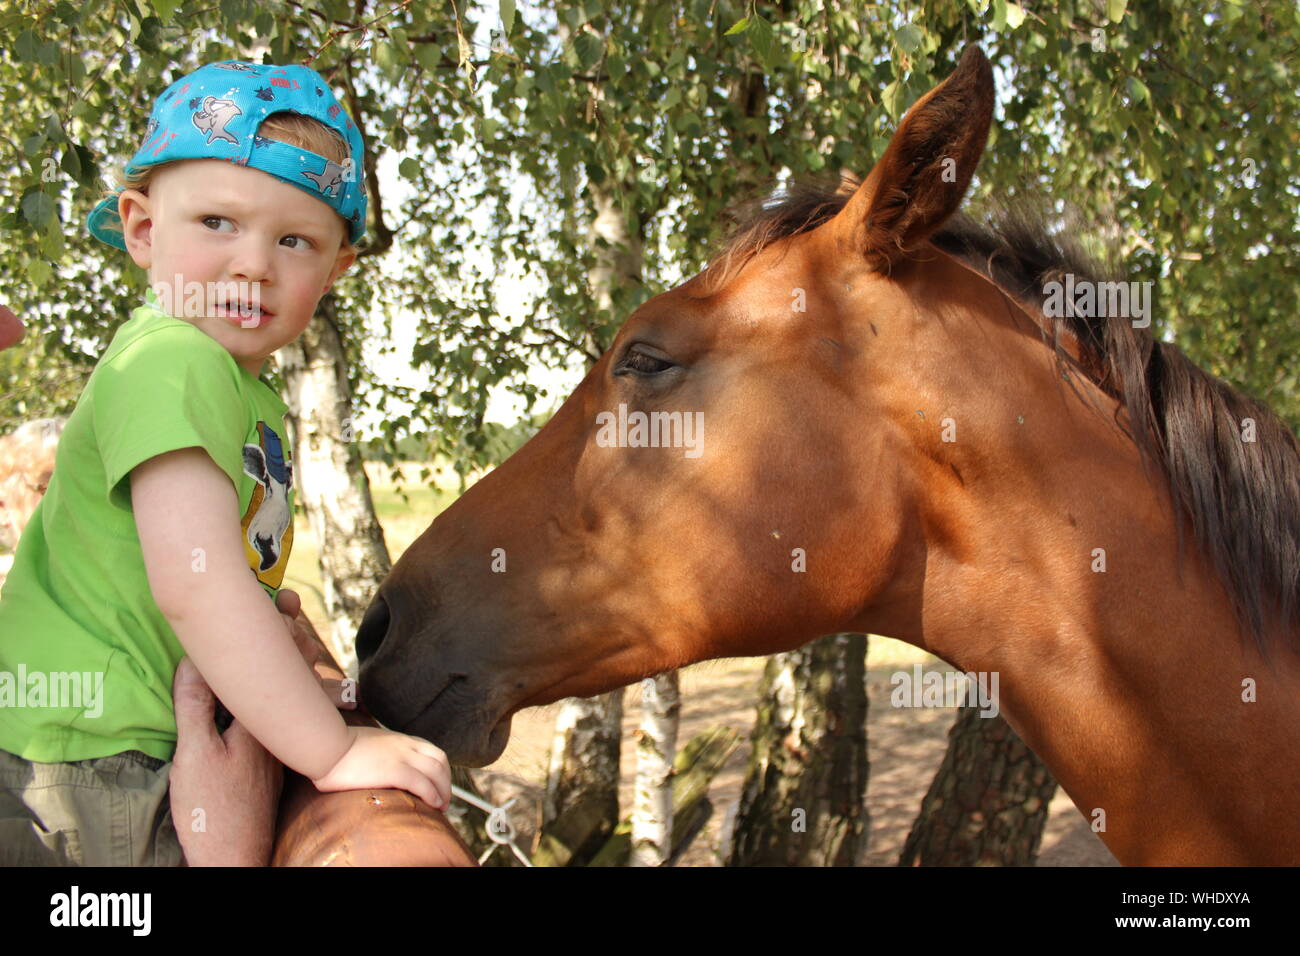 Frightened Boy Standing In Front Of Horse Against Trees Stock Photo